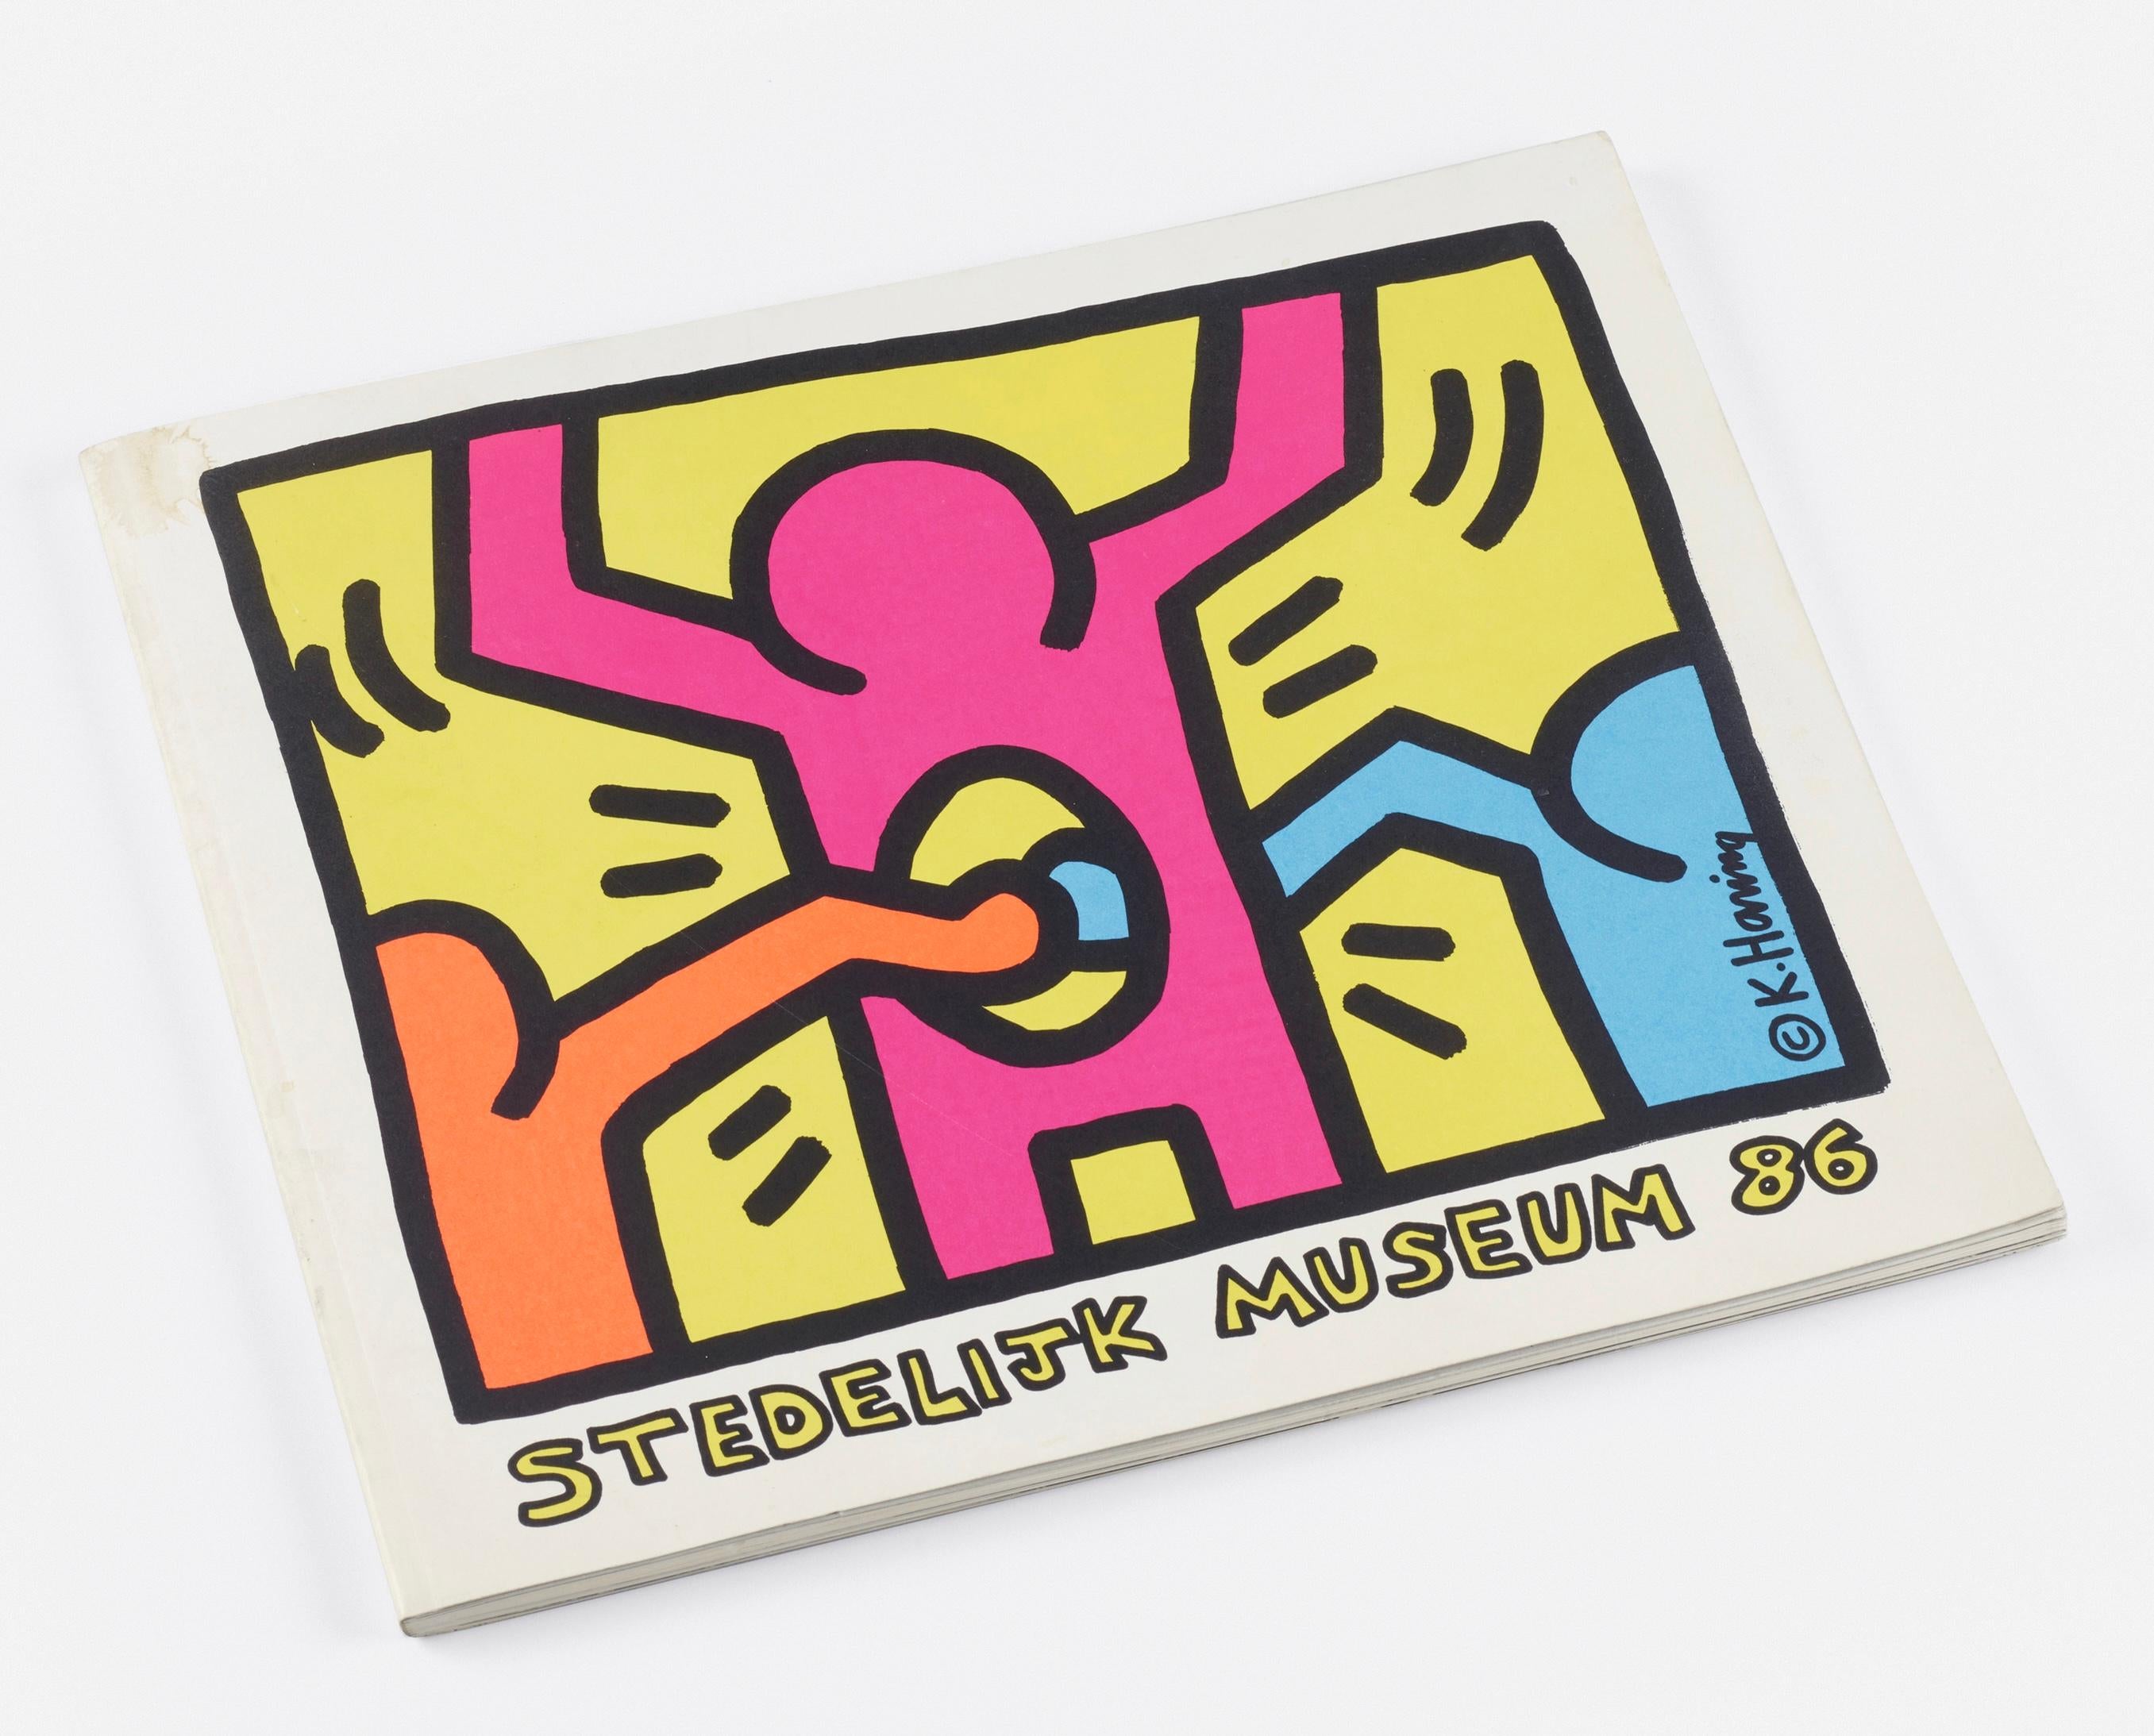 Keith Haring at the Stedelijk Museum, Amsterdam, Netherlands, March 15th – 12th May, 1986:
Signed Keith Haring Stedelijk Museum exhibition catalogue featuring a Keith Haring dancing man drawing connected to the artist's emblematic circle cross. To